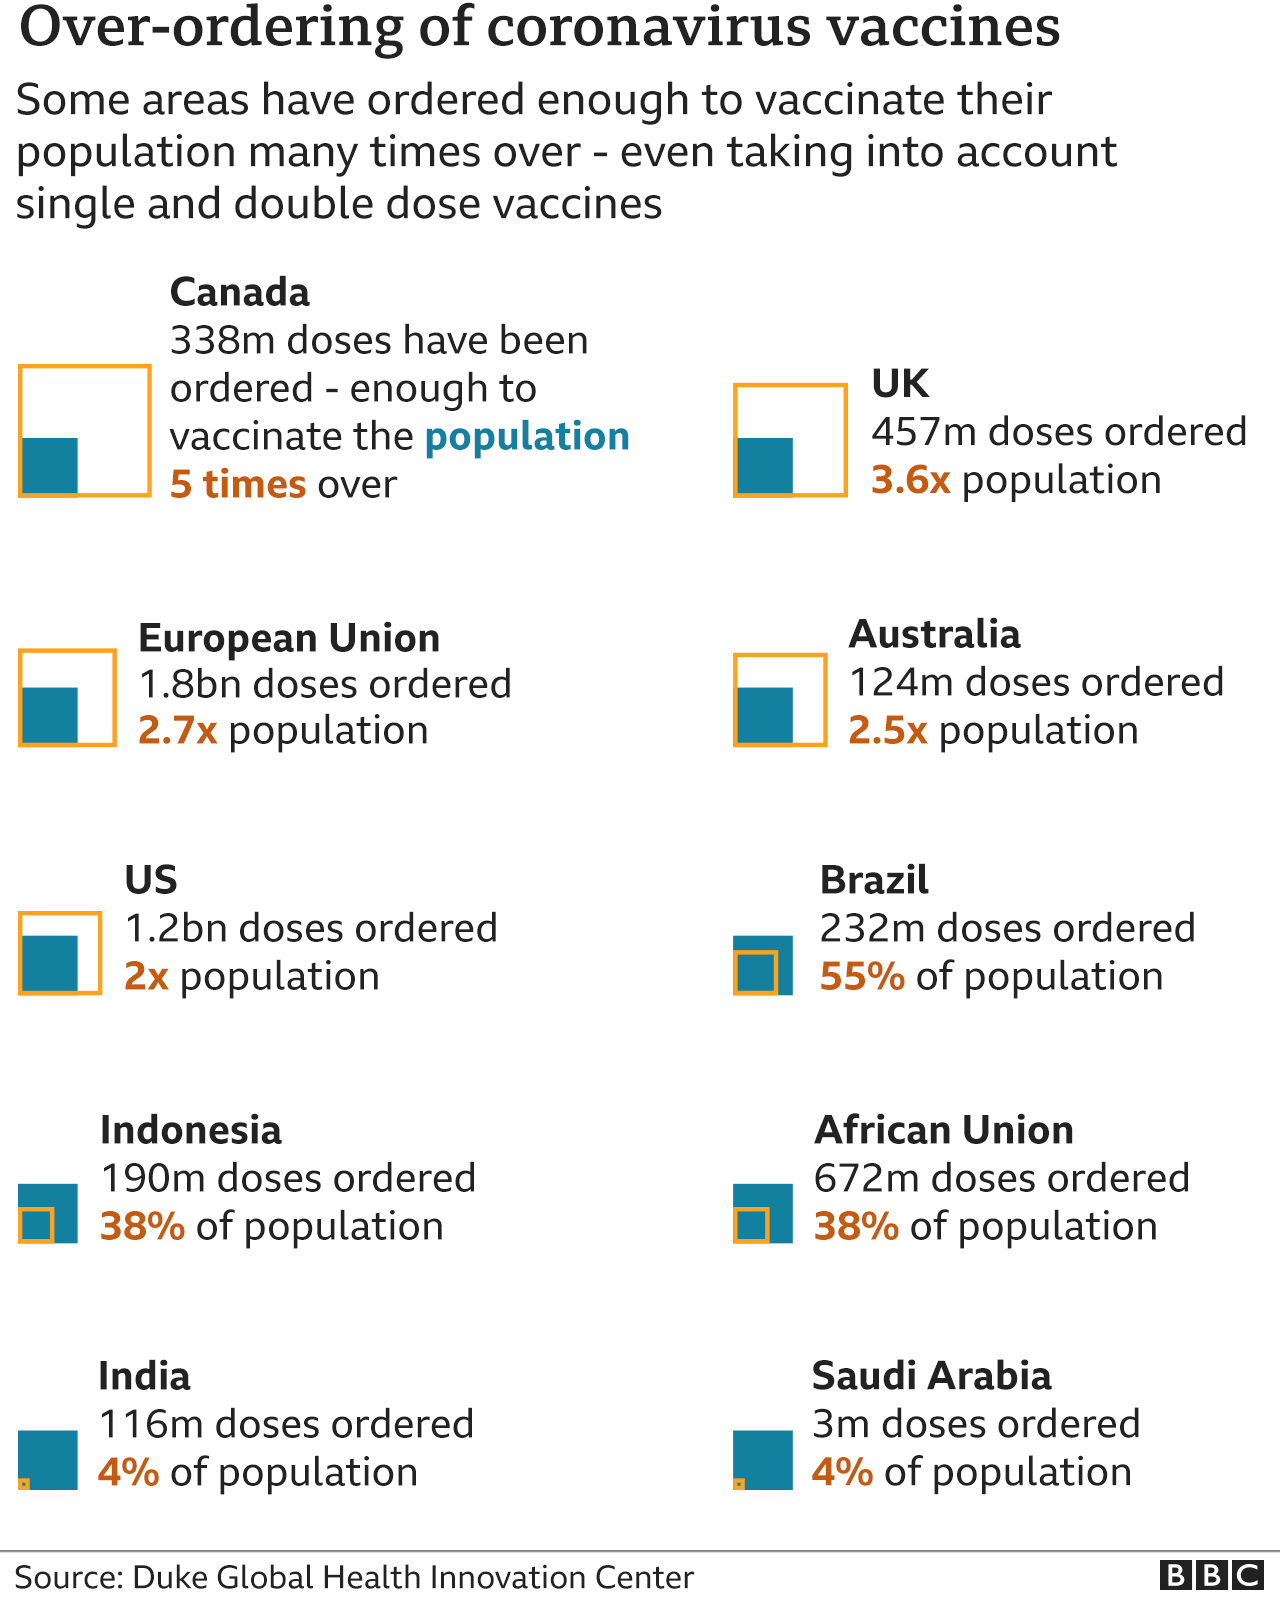 Graphic showing the number of vaccines ordered by some countries, and the proportion of their population covered, and which countries have over-ordered vaccines